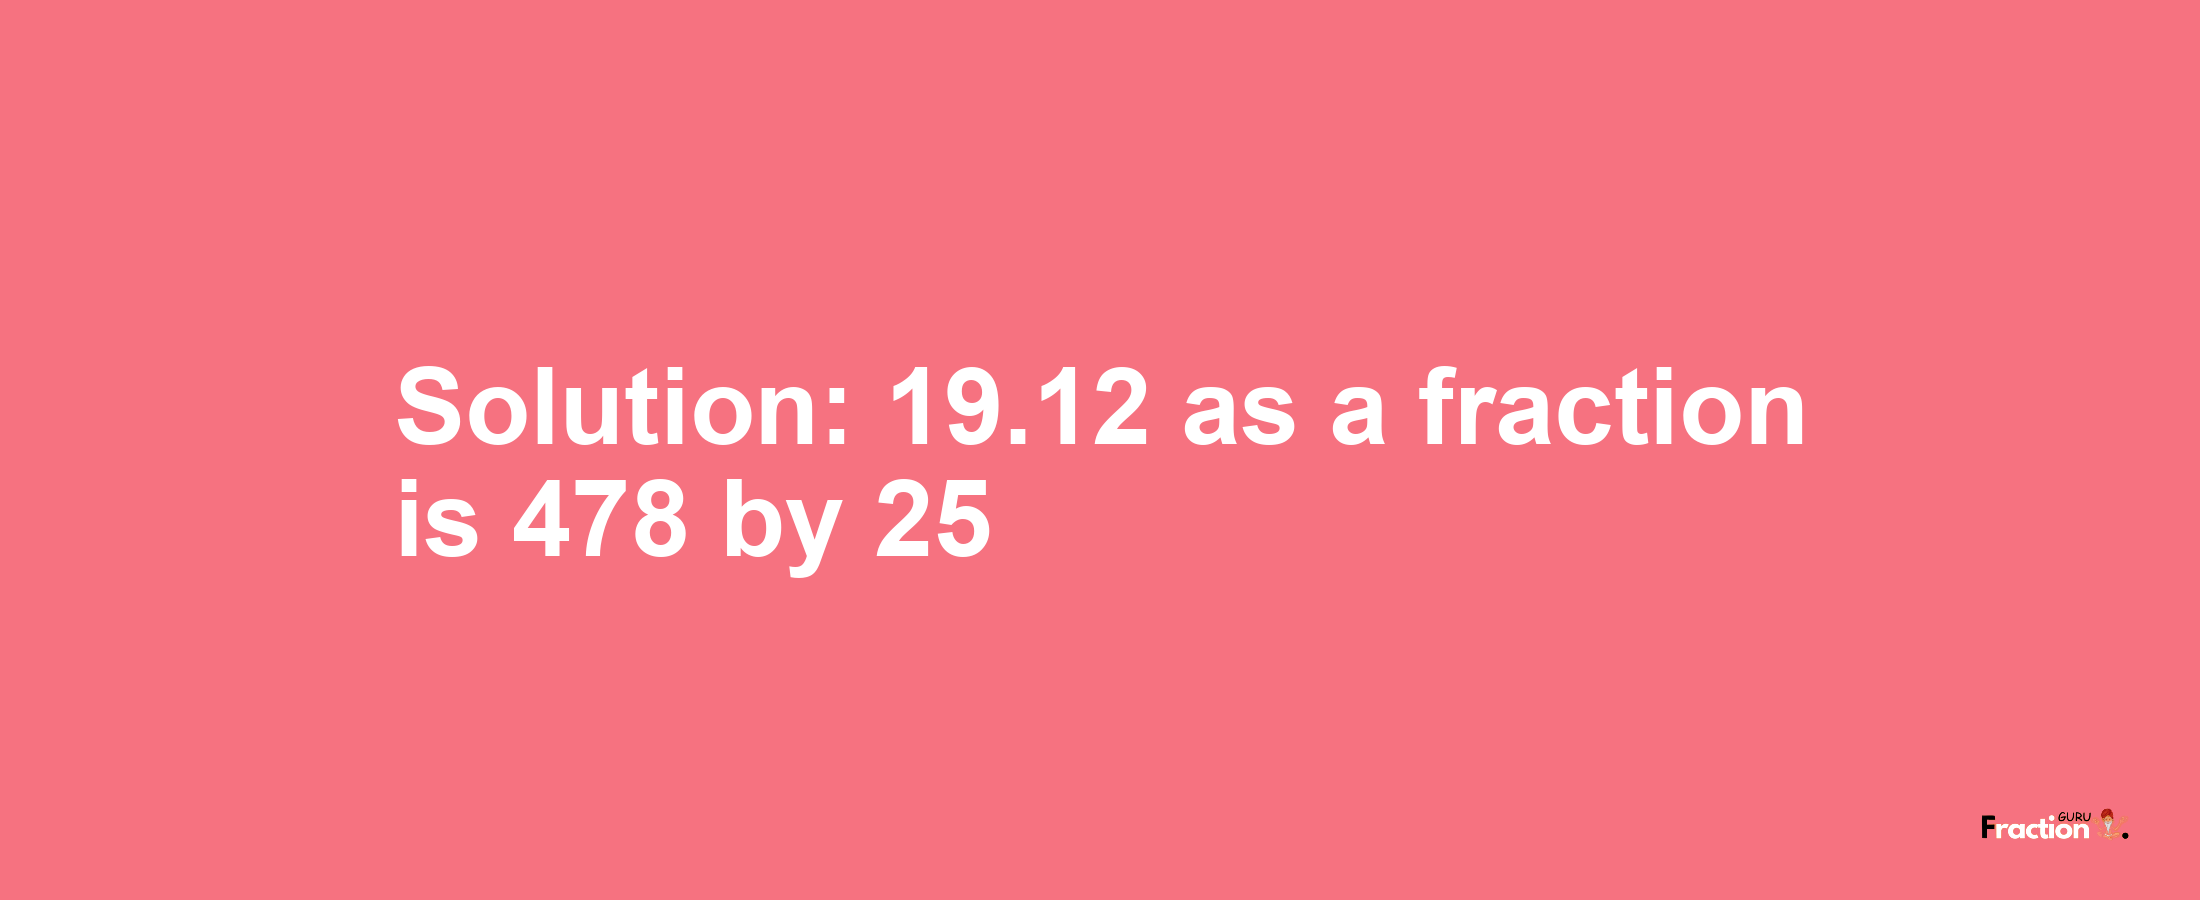 Solution:19.12 as a fraction is 478/25